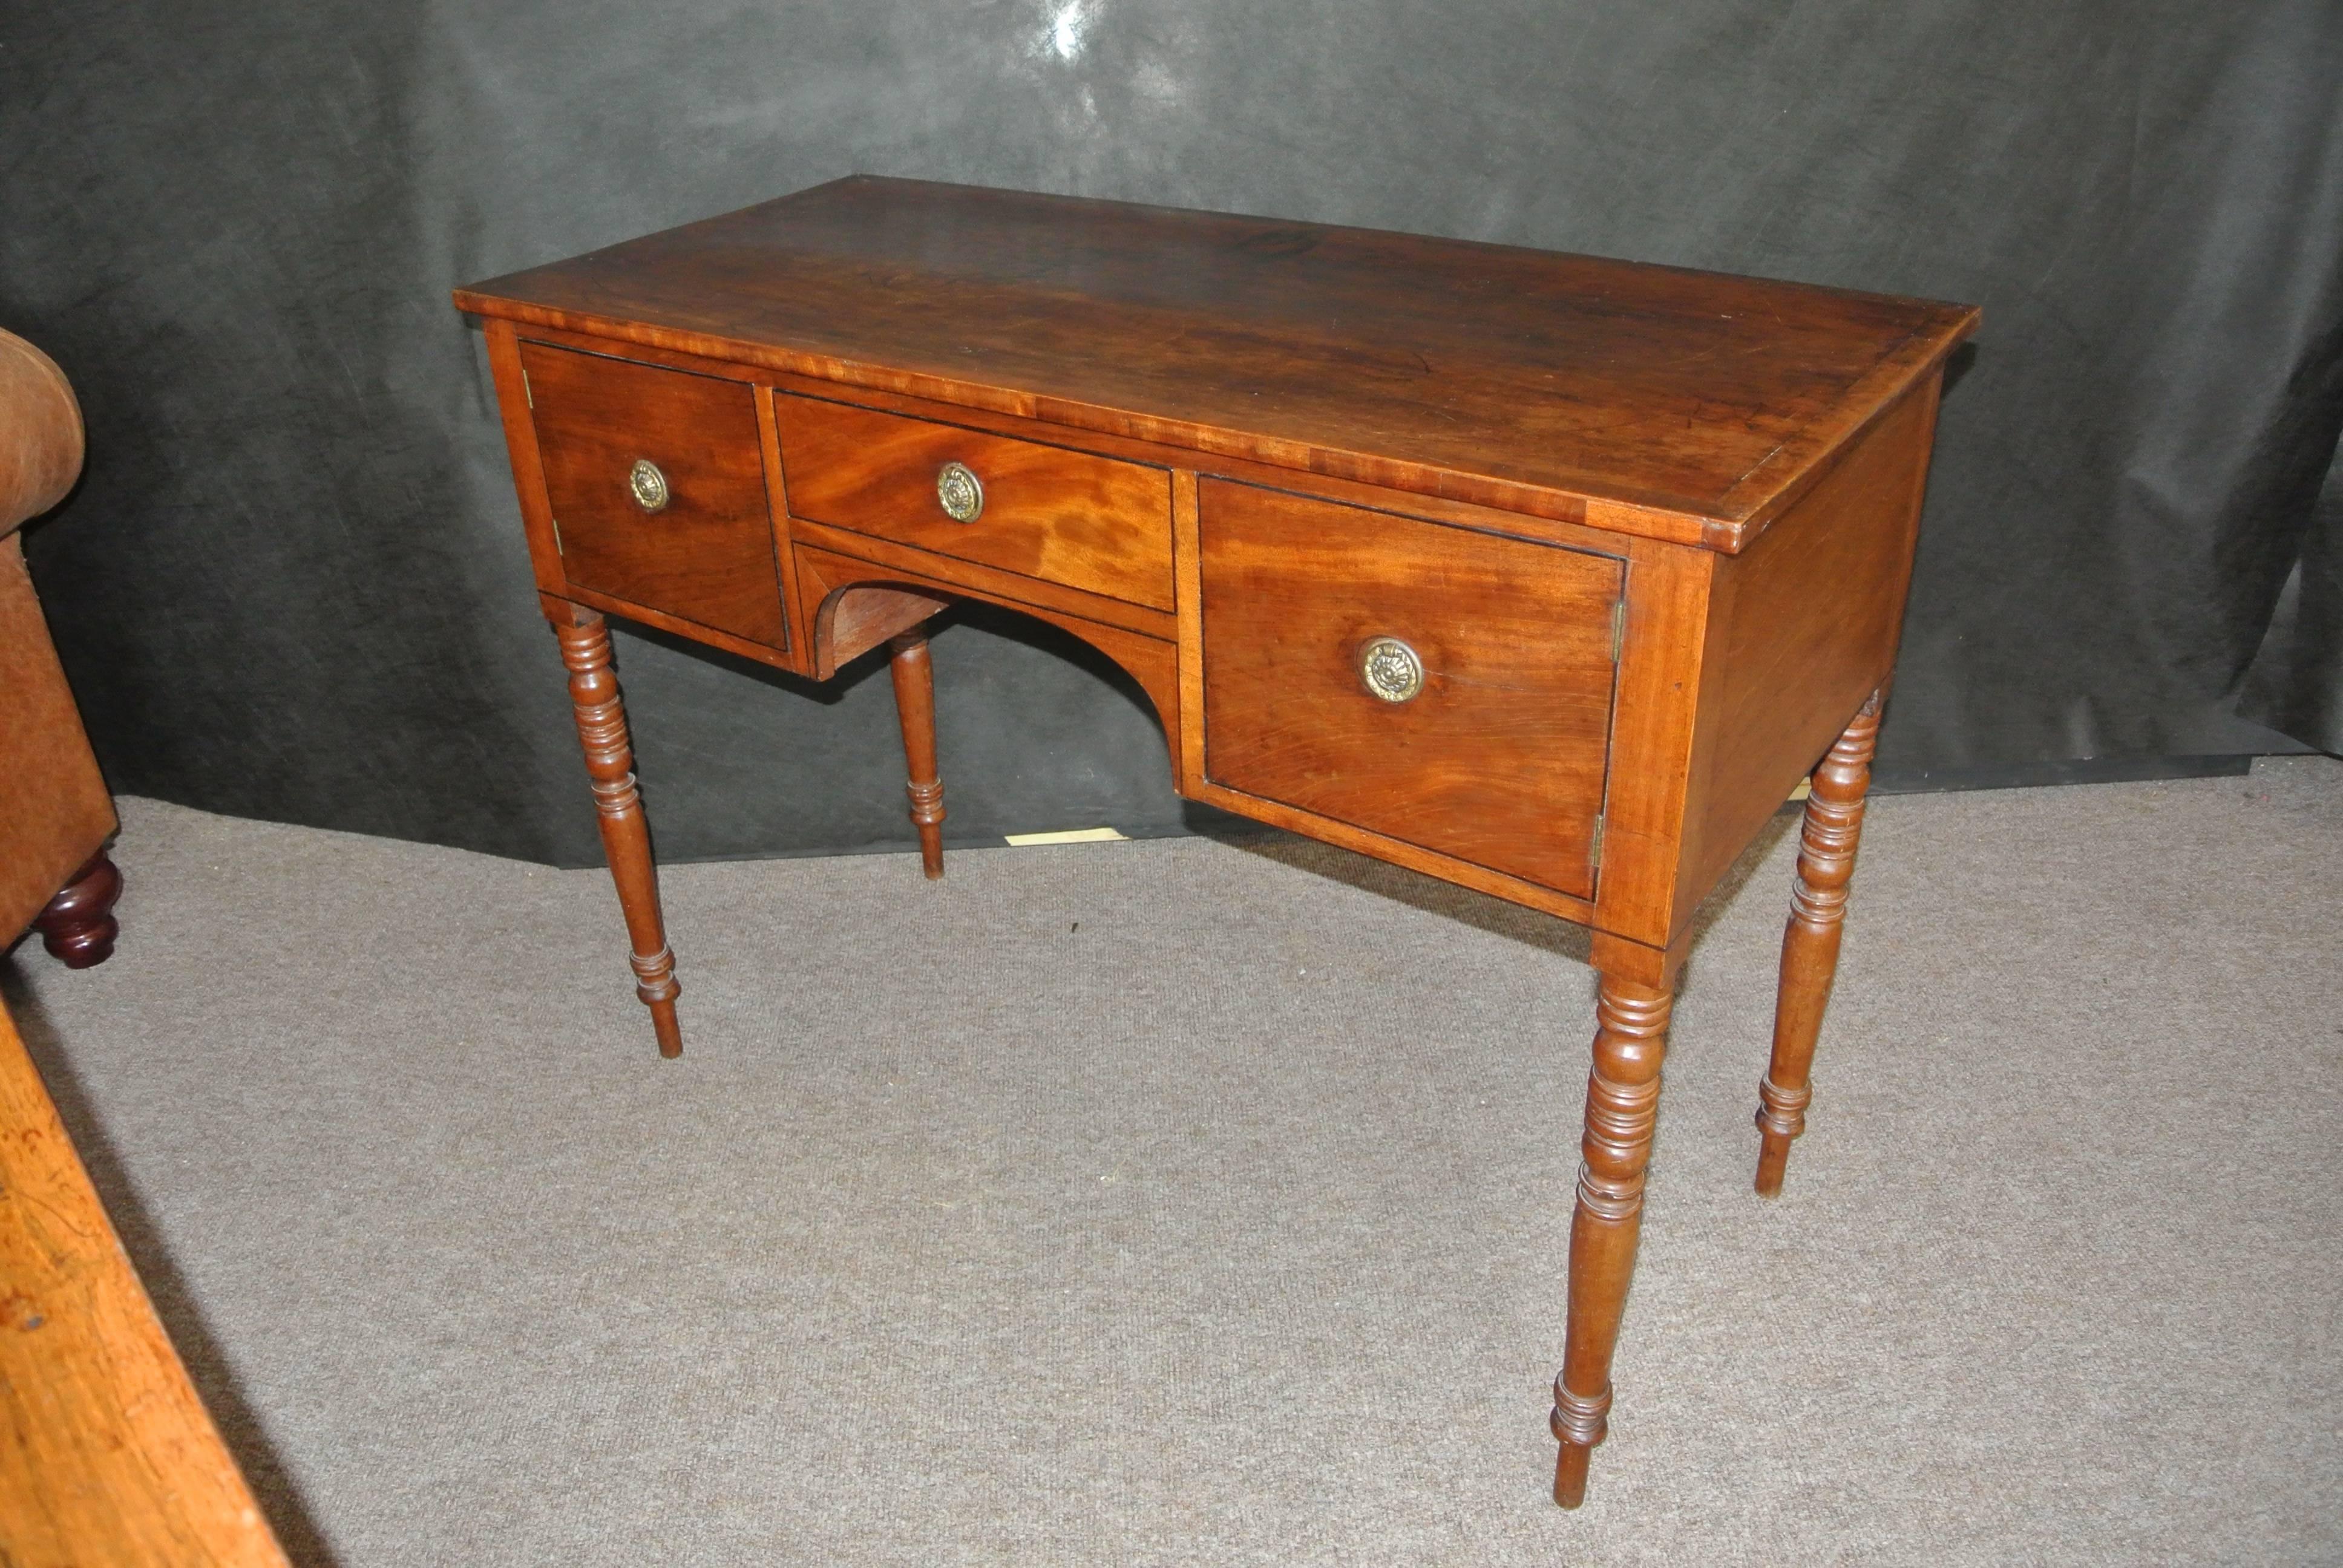 A beautifully figured 18th century George III mahogany kneehole side table with a large centre drawer and cabinets either side on four turned legs.